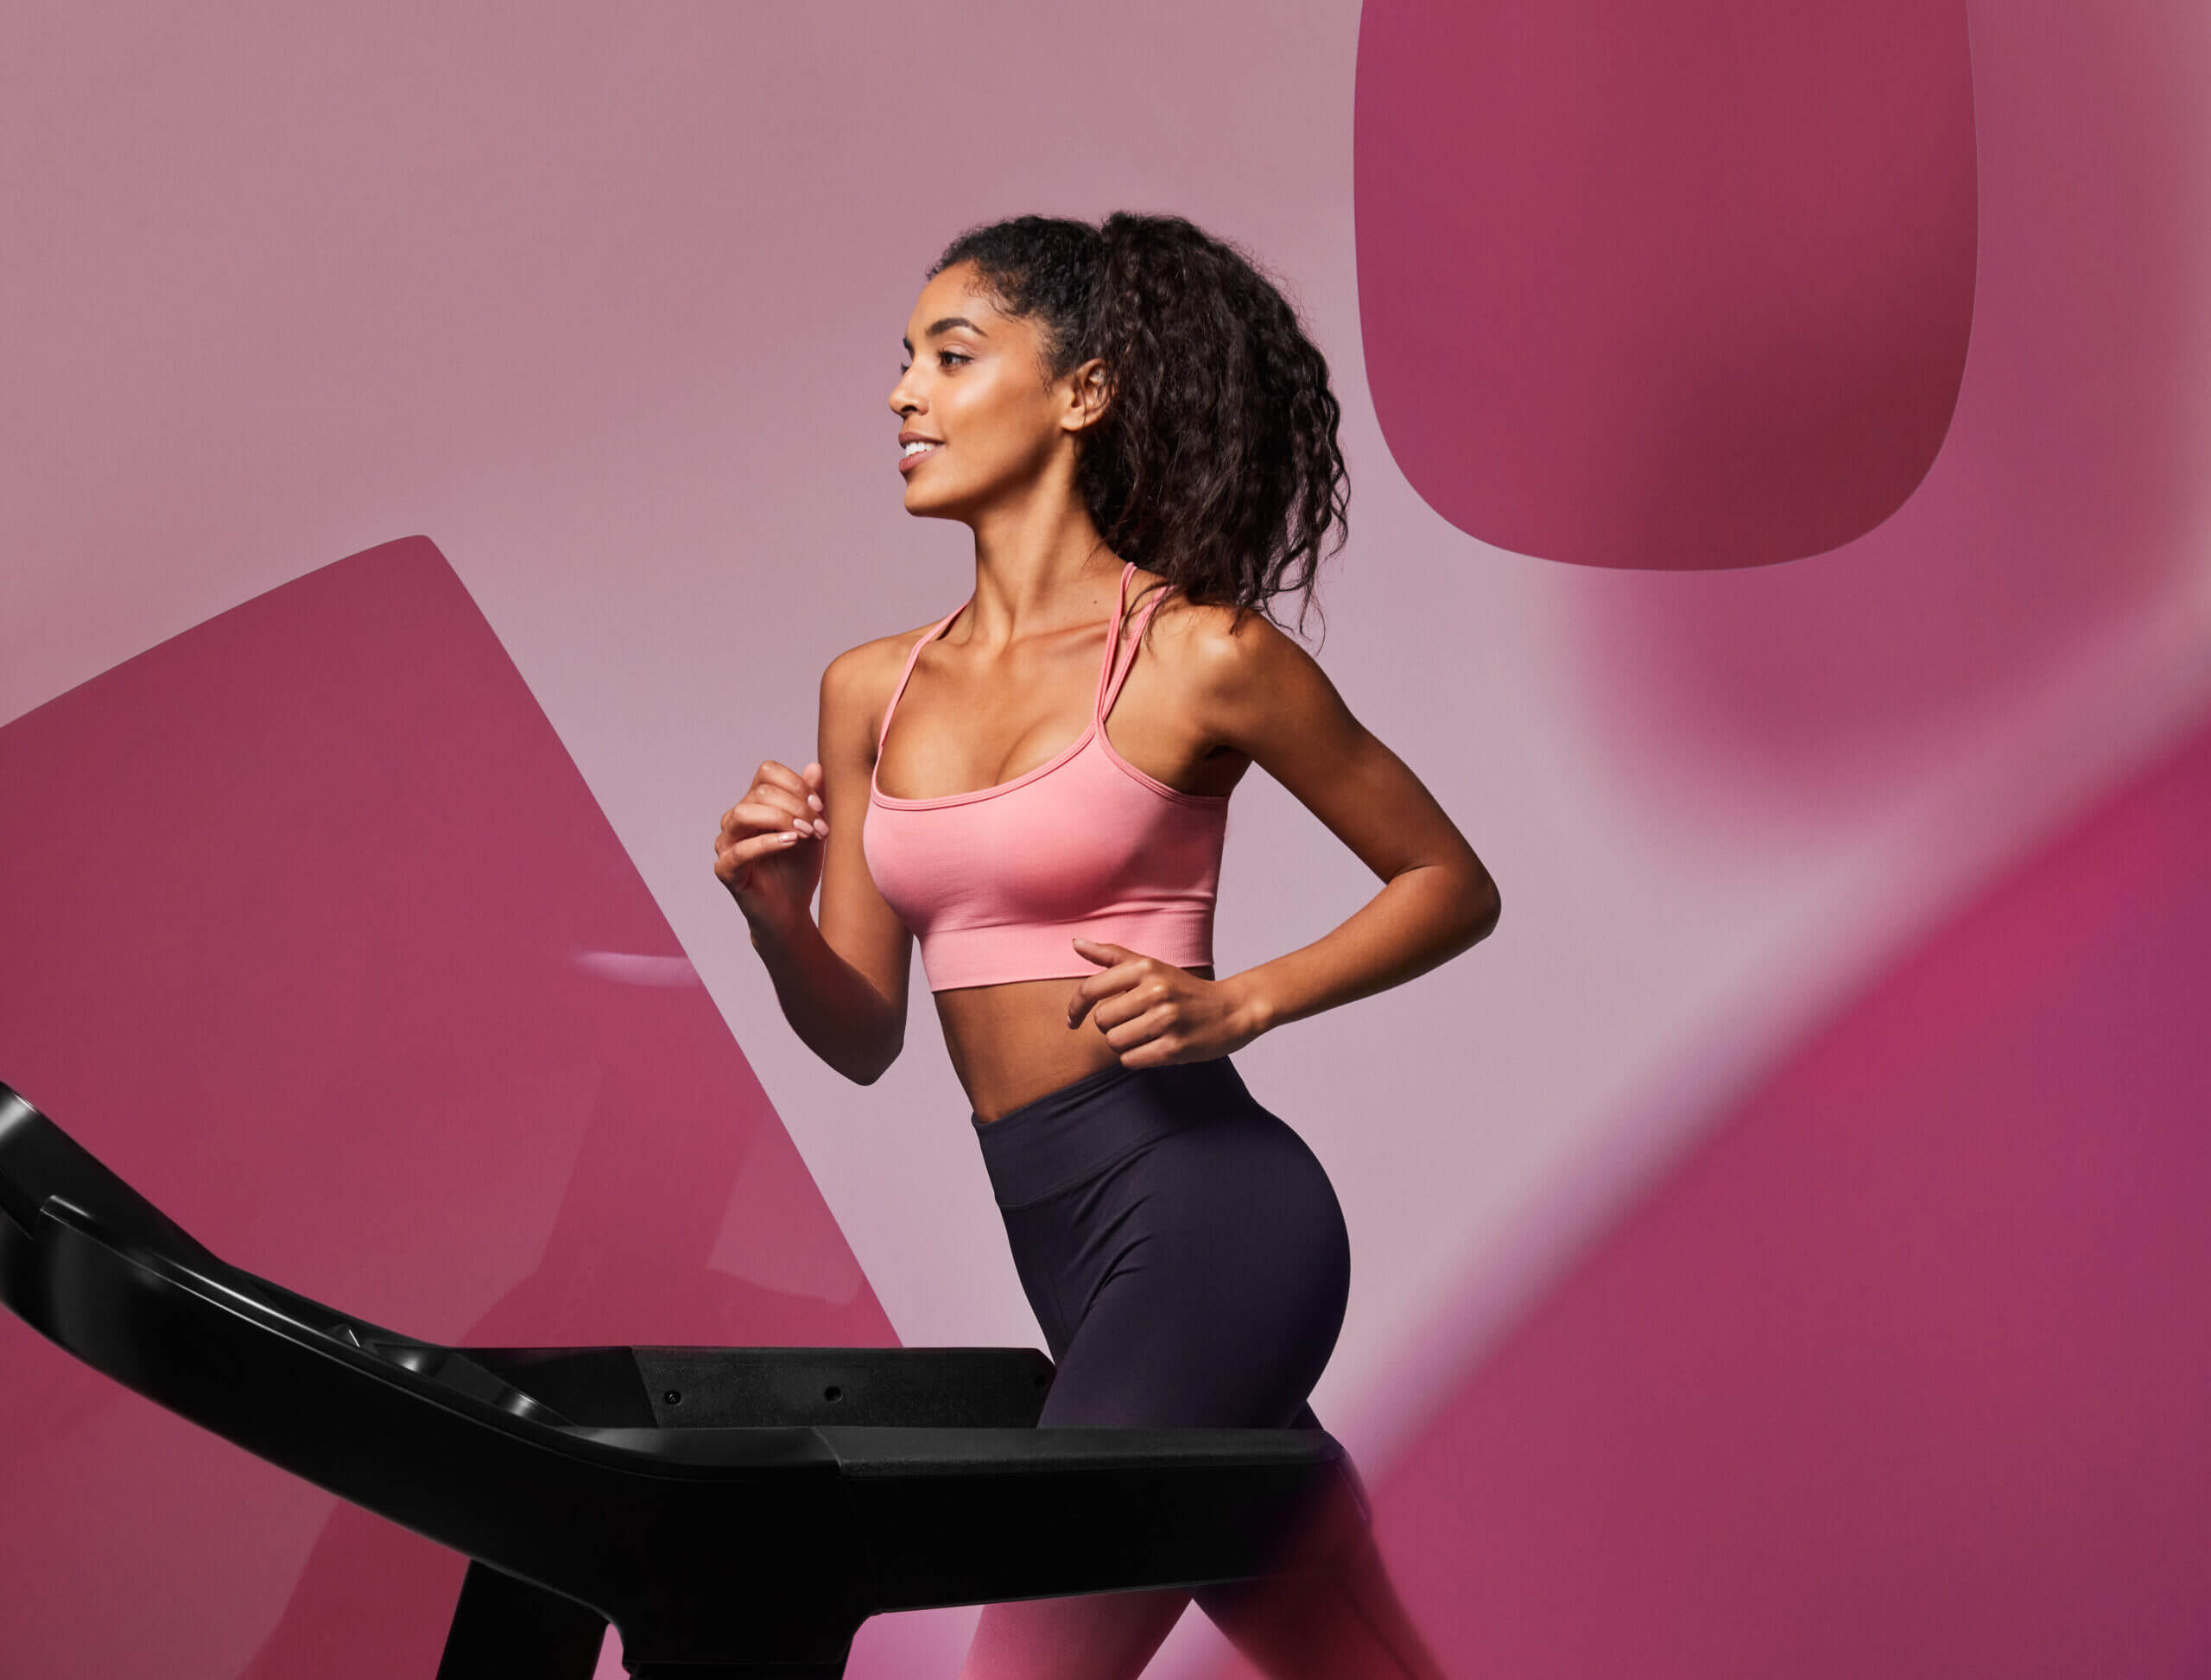 Set up your own gym with Bodytone